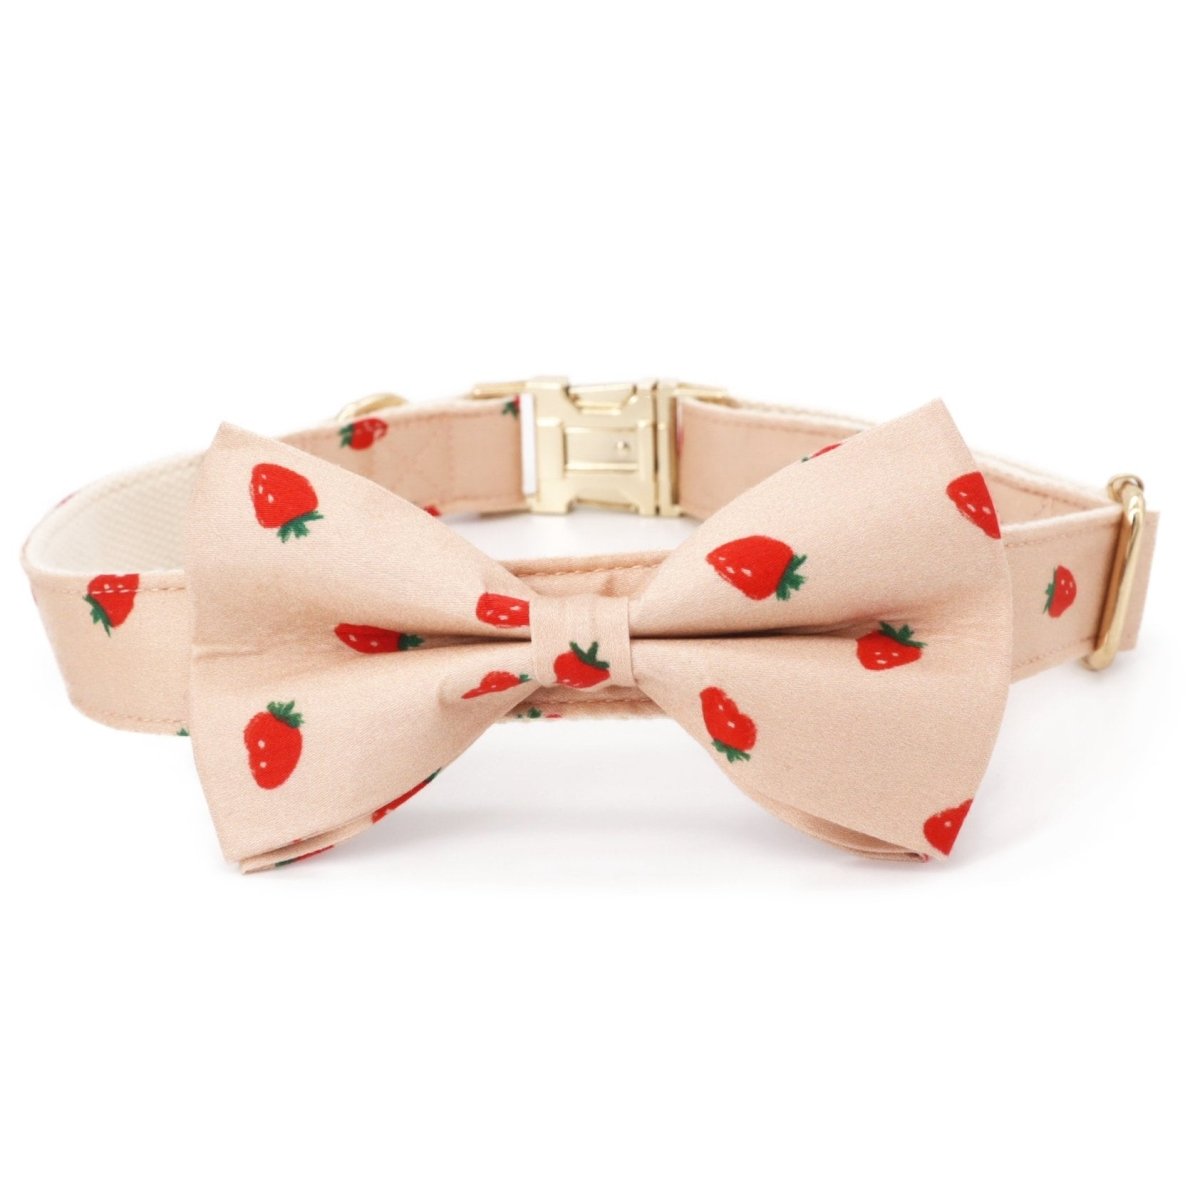 designer dog collars with bow tie for girls and boys - dog bow tie attach to collar - cool dog collars